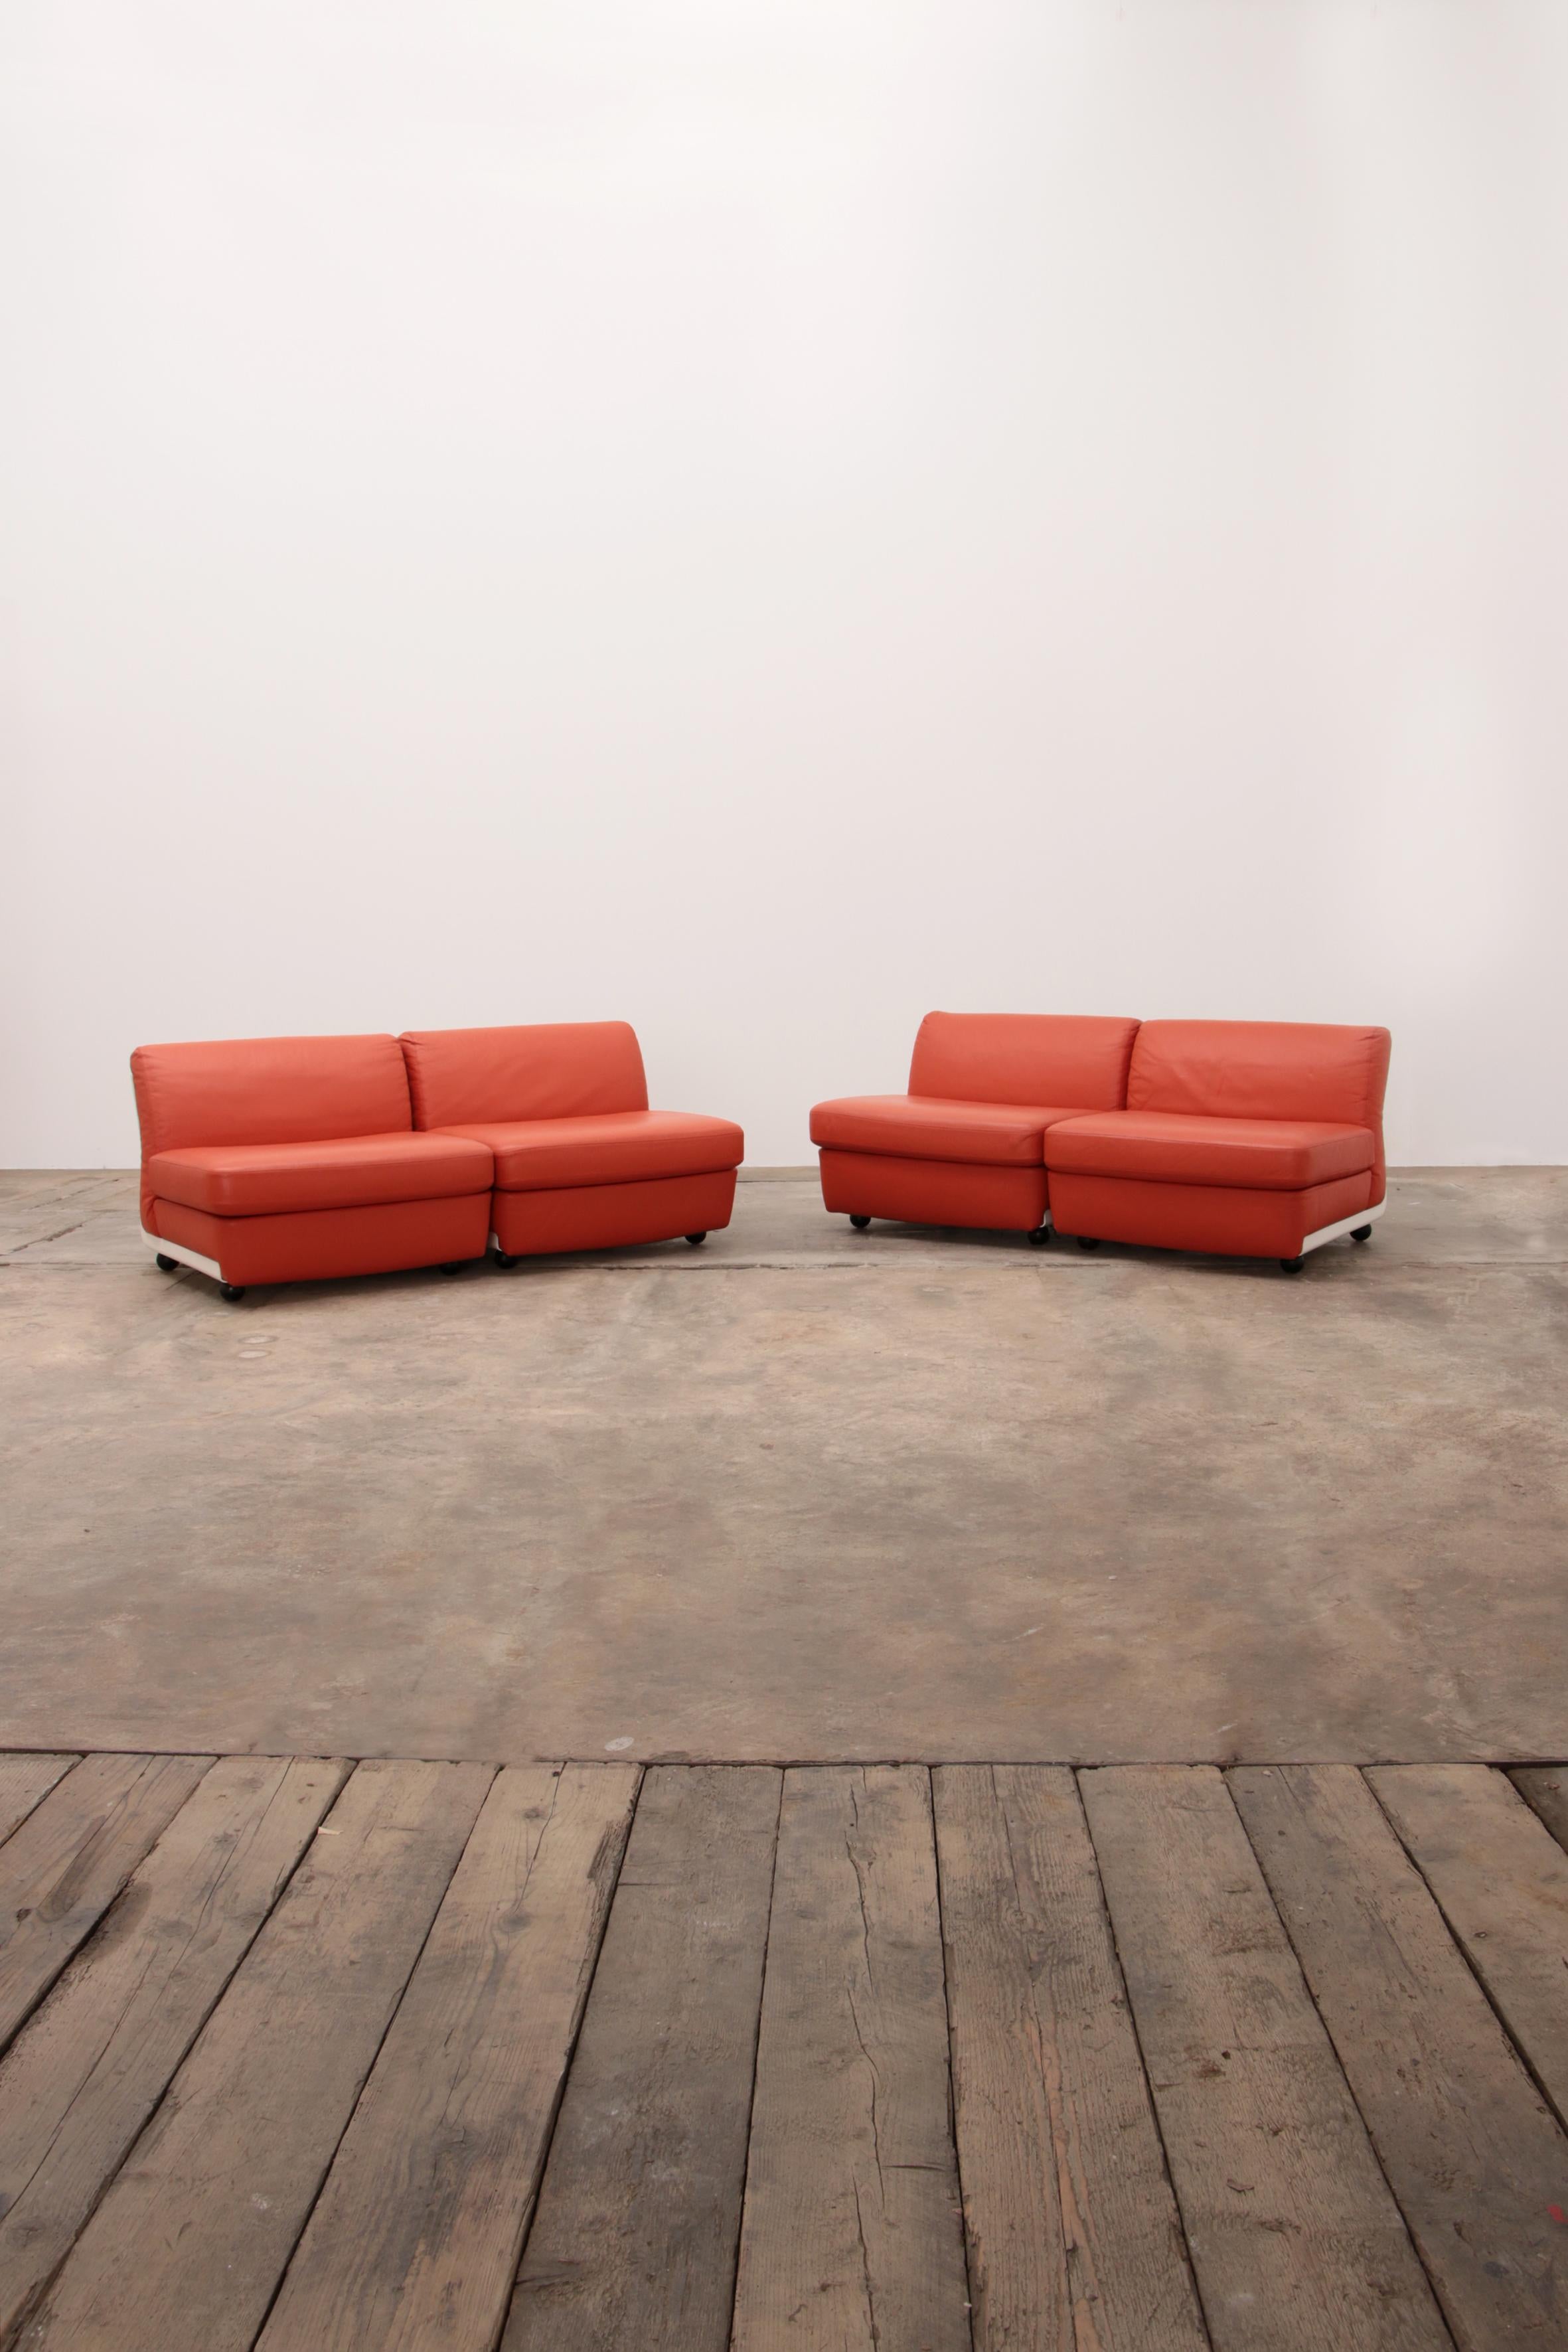 Mario Bellini Amanta modular sofa in orange leather for C&B Italy, 1960s.

Four separate elements can be used as lounge chairs or sofa.

The shells are white fiberglass and the seats are upholstered with the original orange leather upholstery.